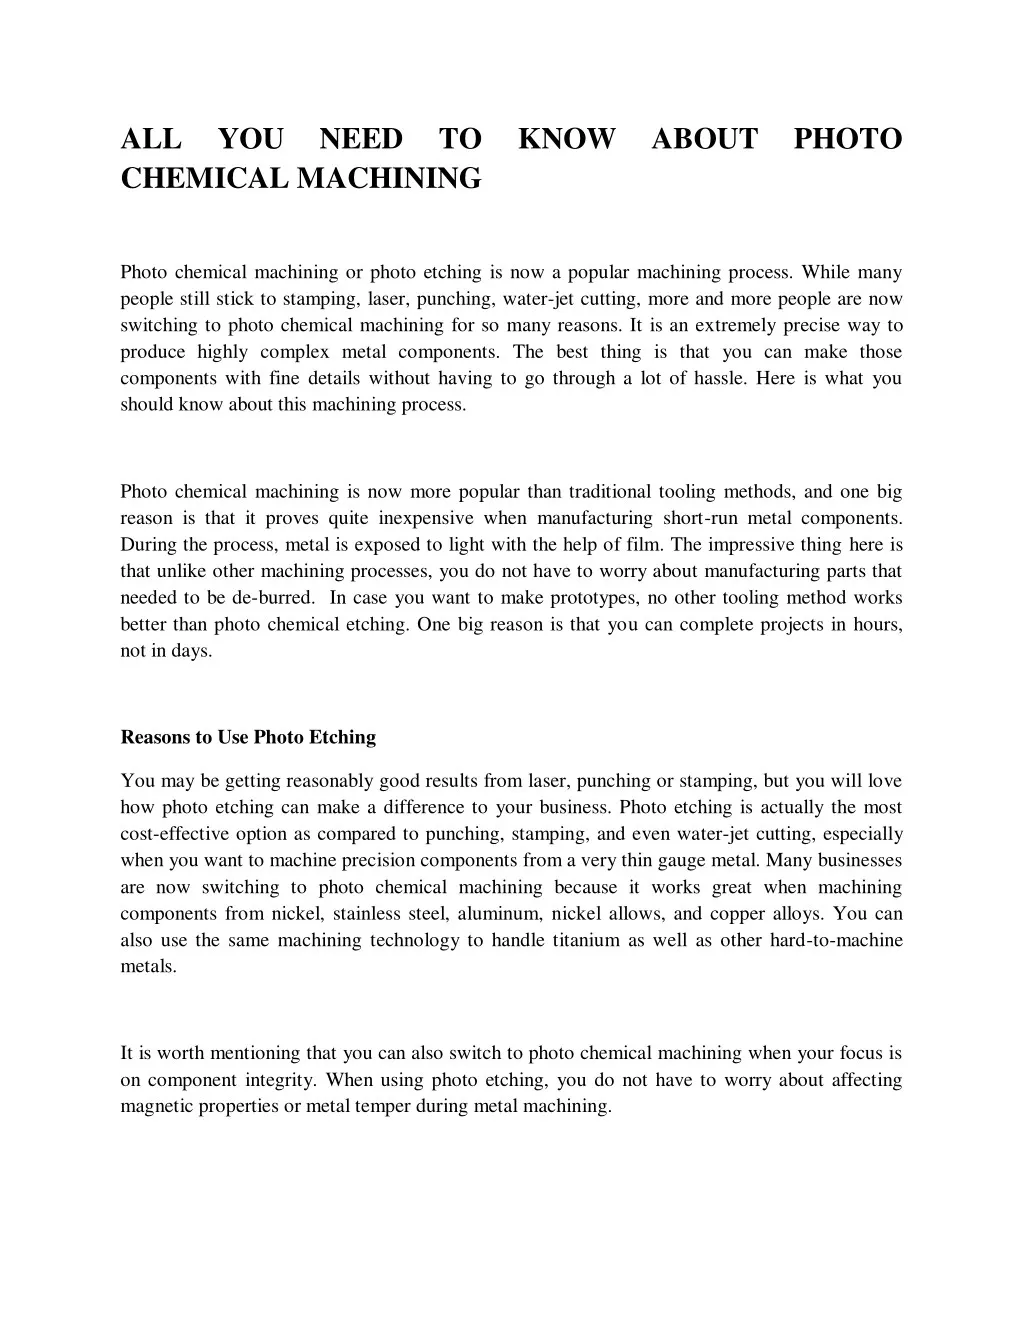 all chemical machining